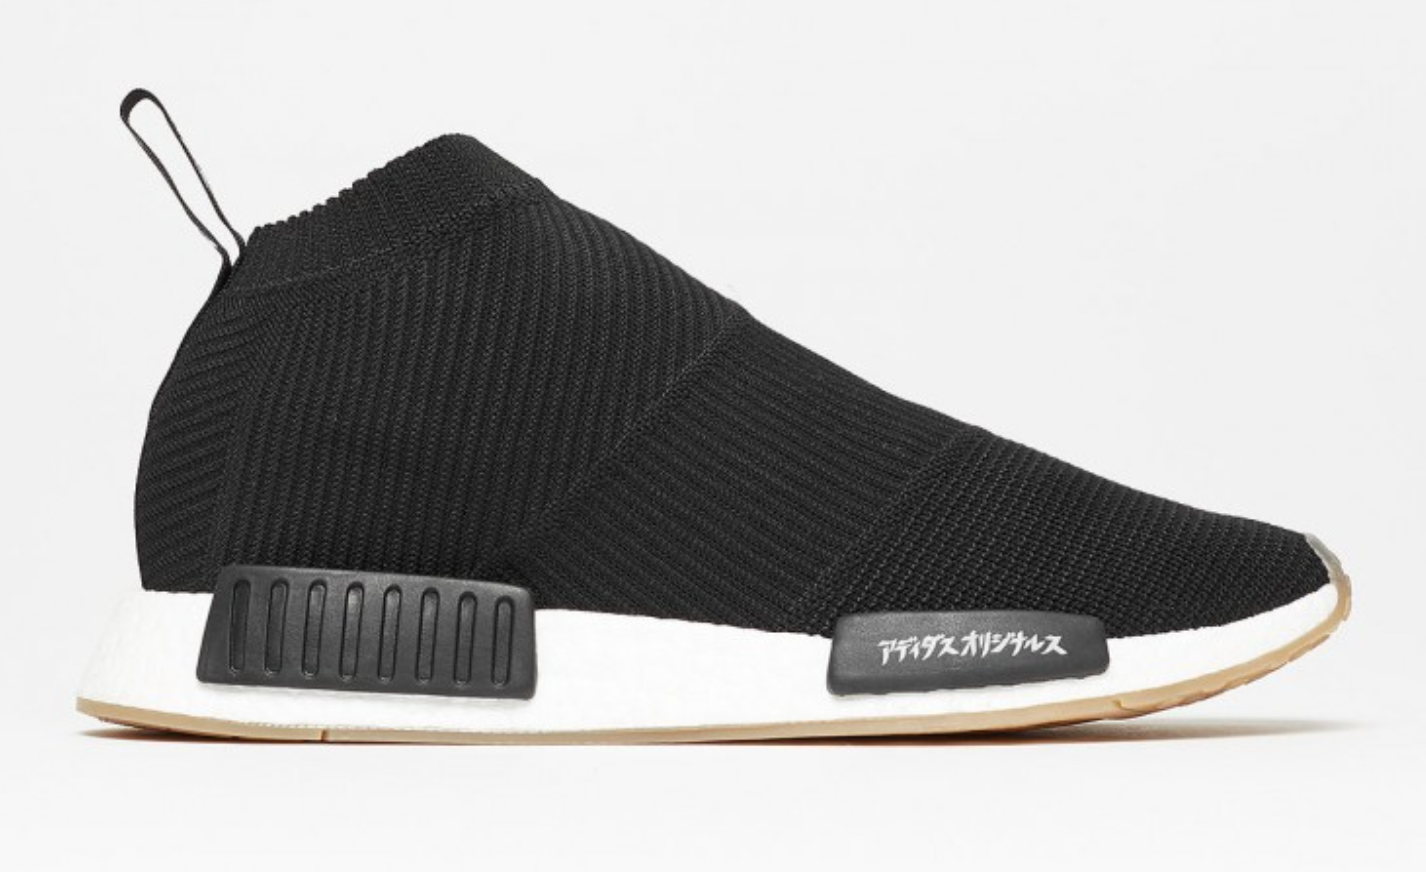 United Arrows Png - The United Arrows U0026 Sons X Adidas Nmd City Sock Will Be Releasing Soon, Which Is Somewhat Similar To The Recent Winter Wool And Black Gum Versions., Transparent background PNG HD thumbnail